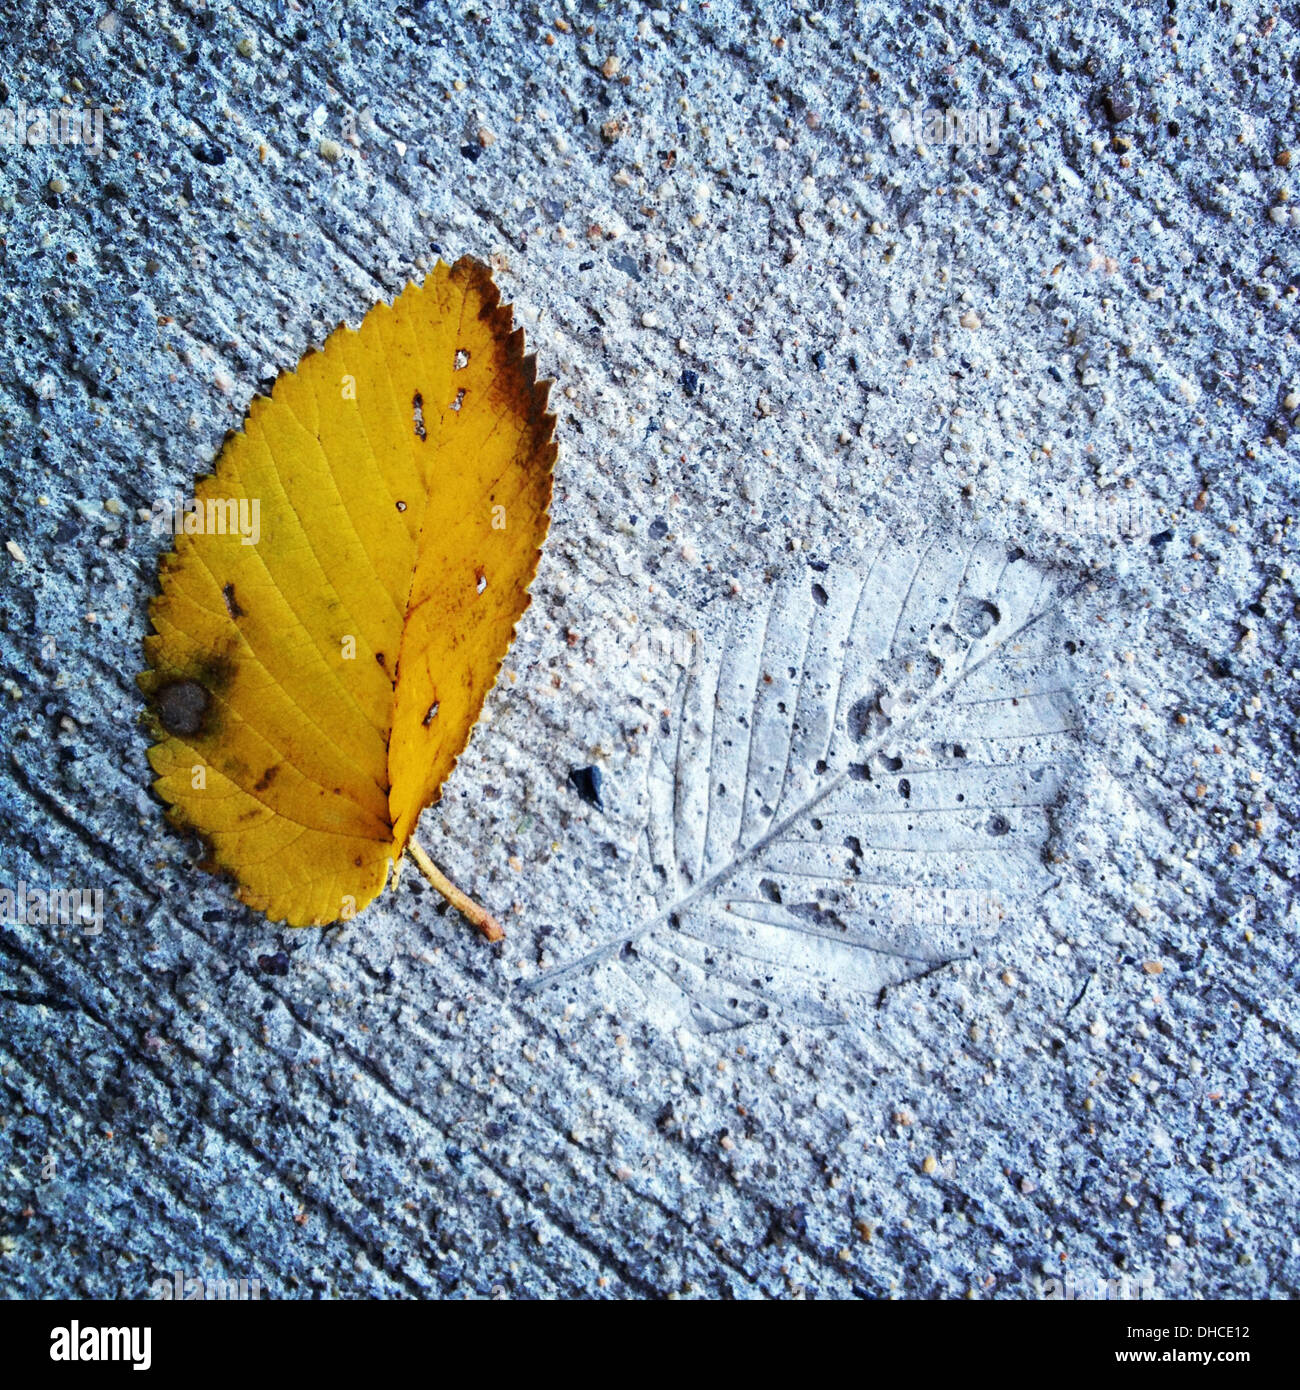 Yellow Leaf next to Leaf Imprint in Cement Stock Photo